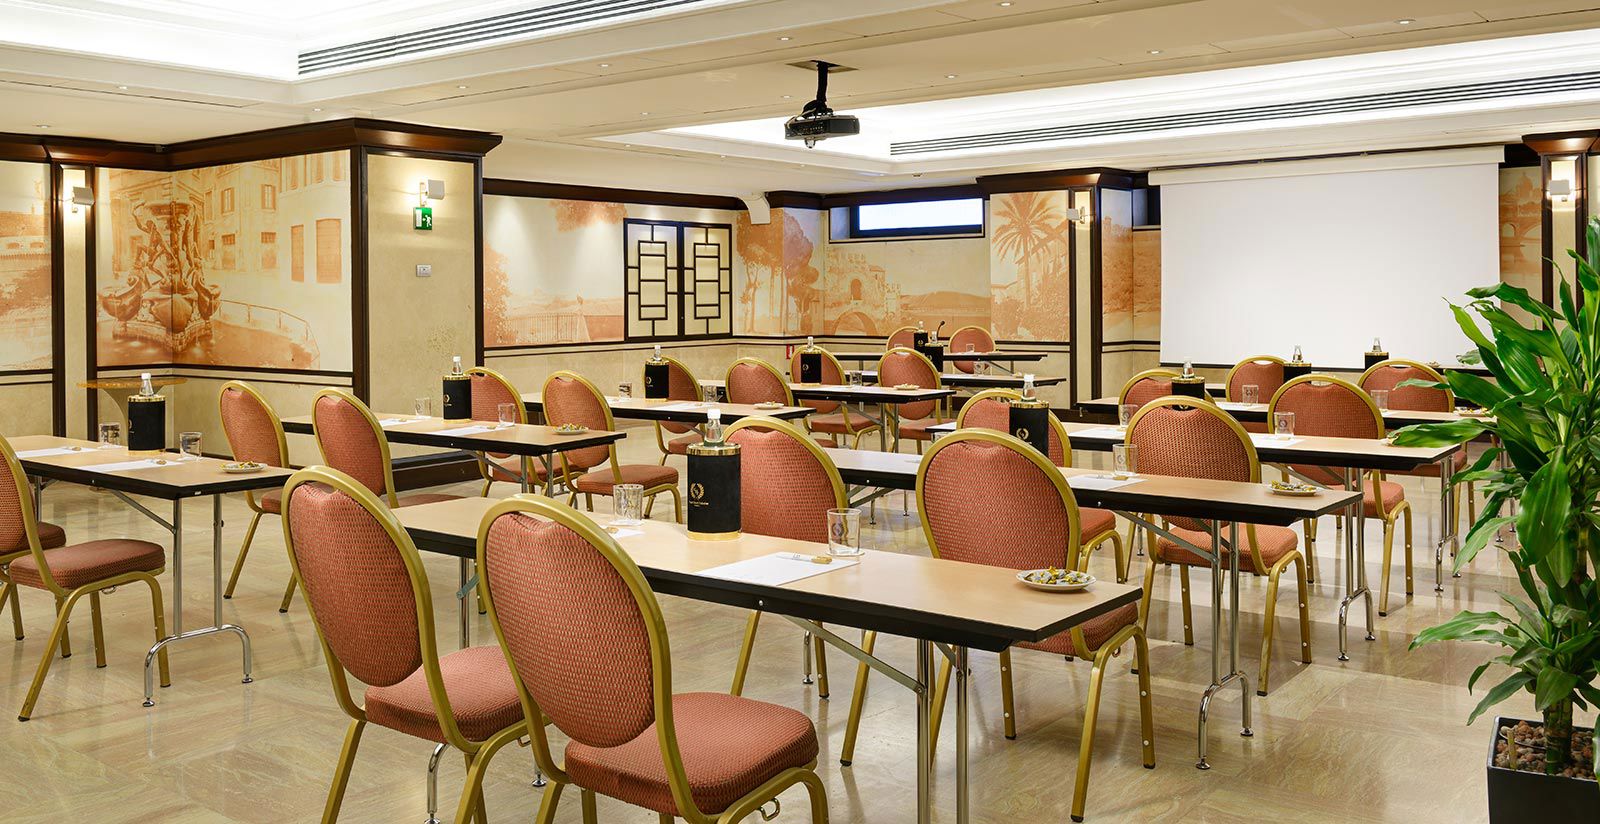 Il Globo Roma - Meeting rooms in Rome near the Colosseum  4